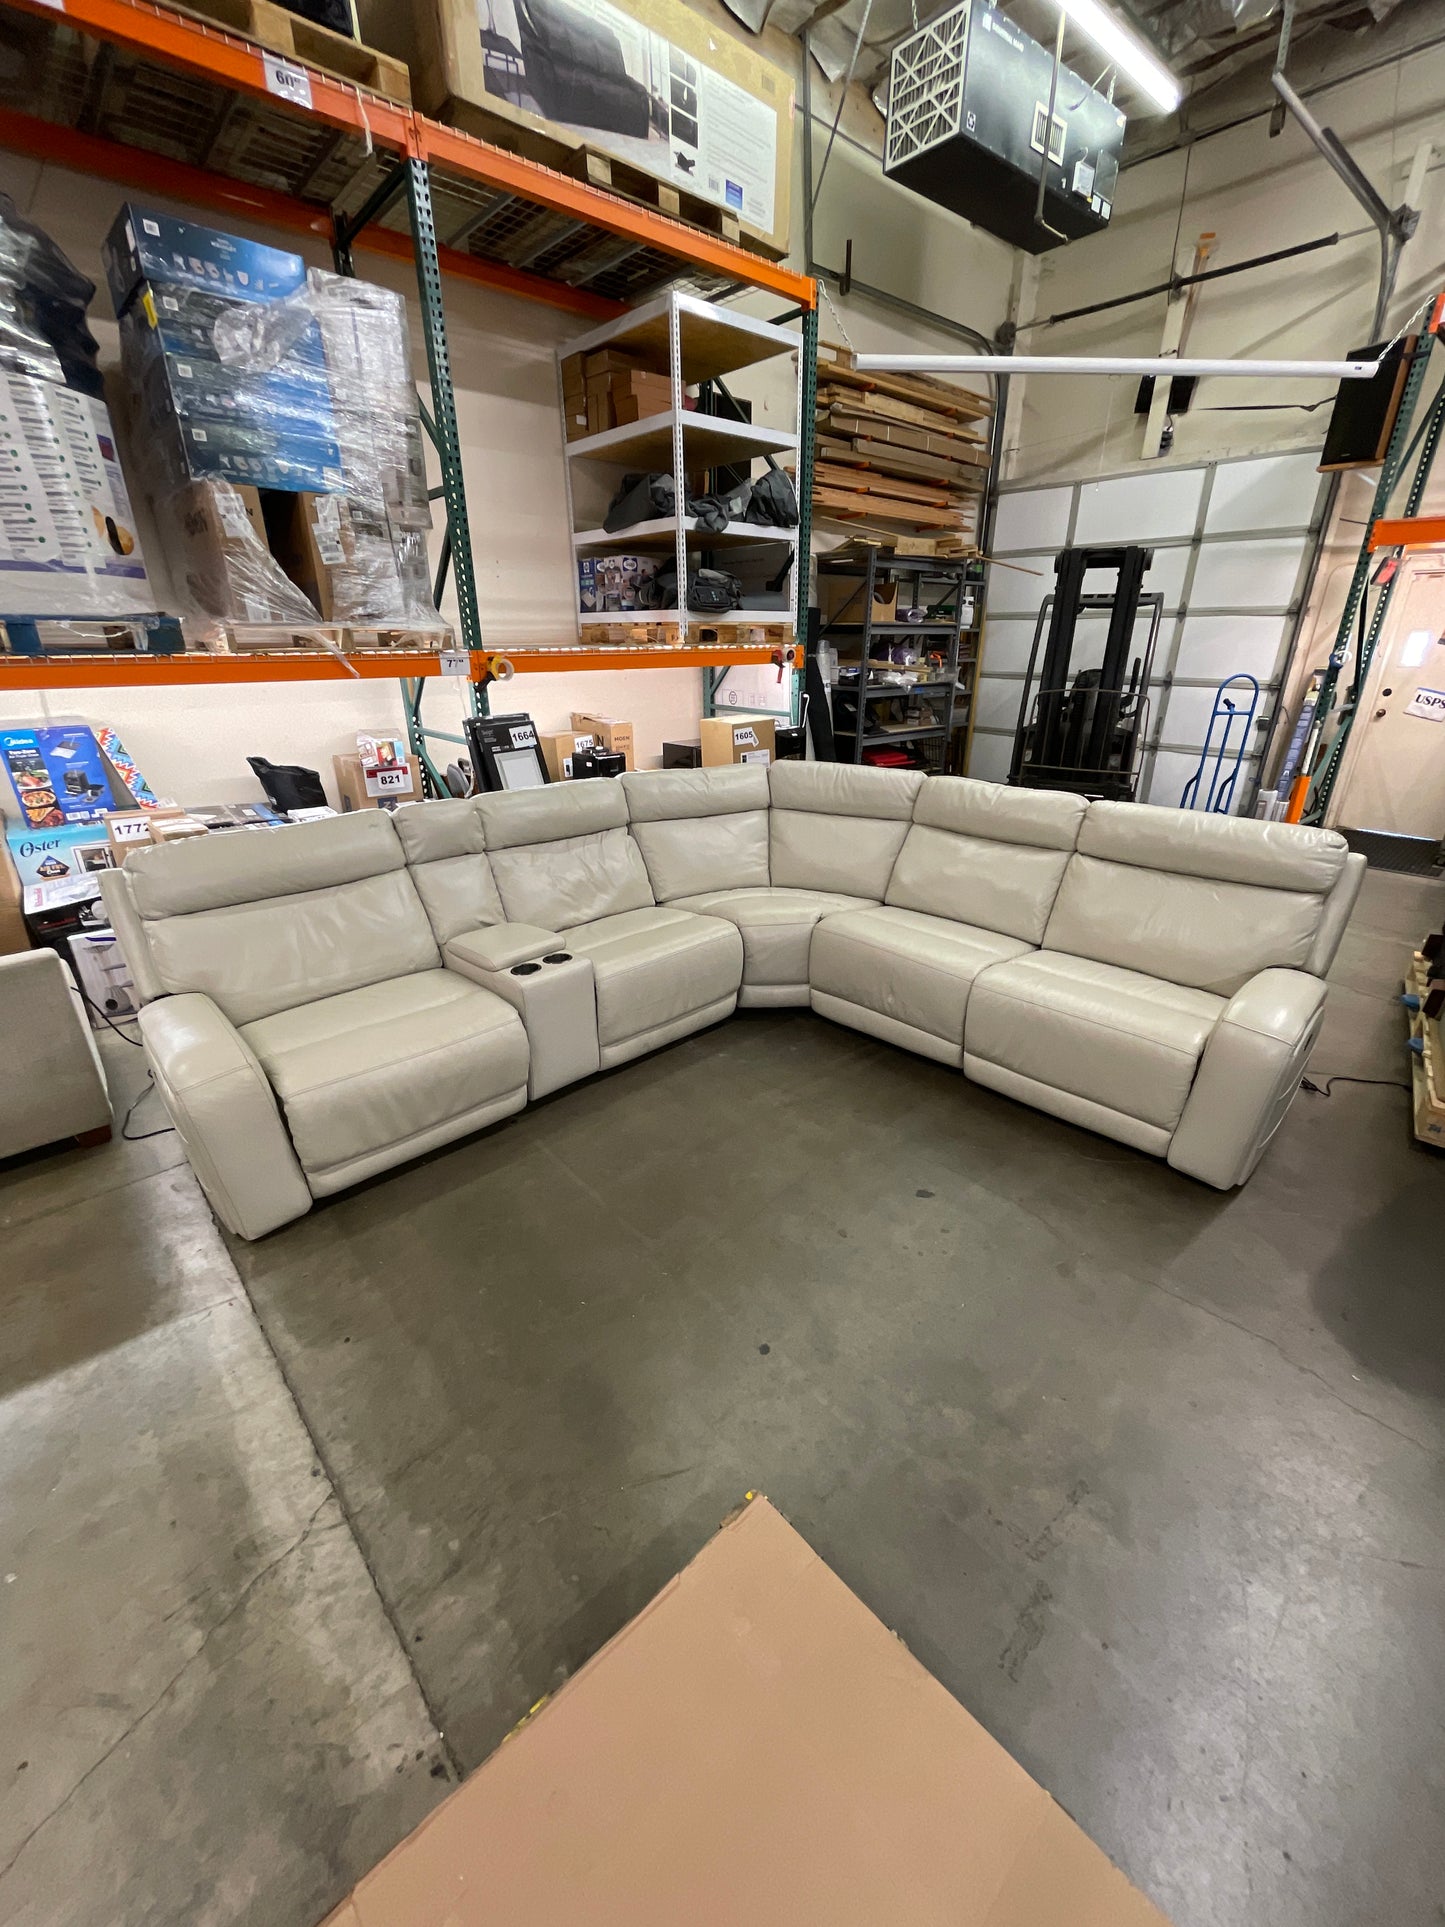 Costco - Gearhart 6-piece Leather Power Reclining Sectional with Power Headrests - Retail $2699